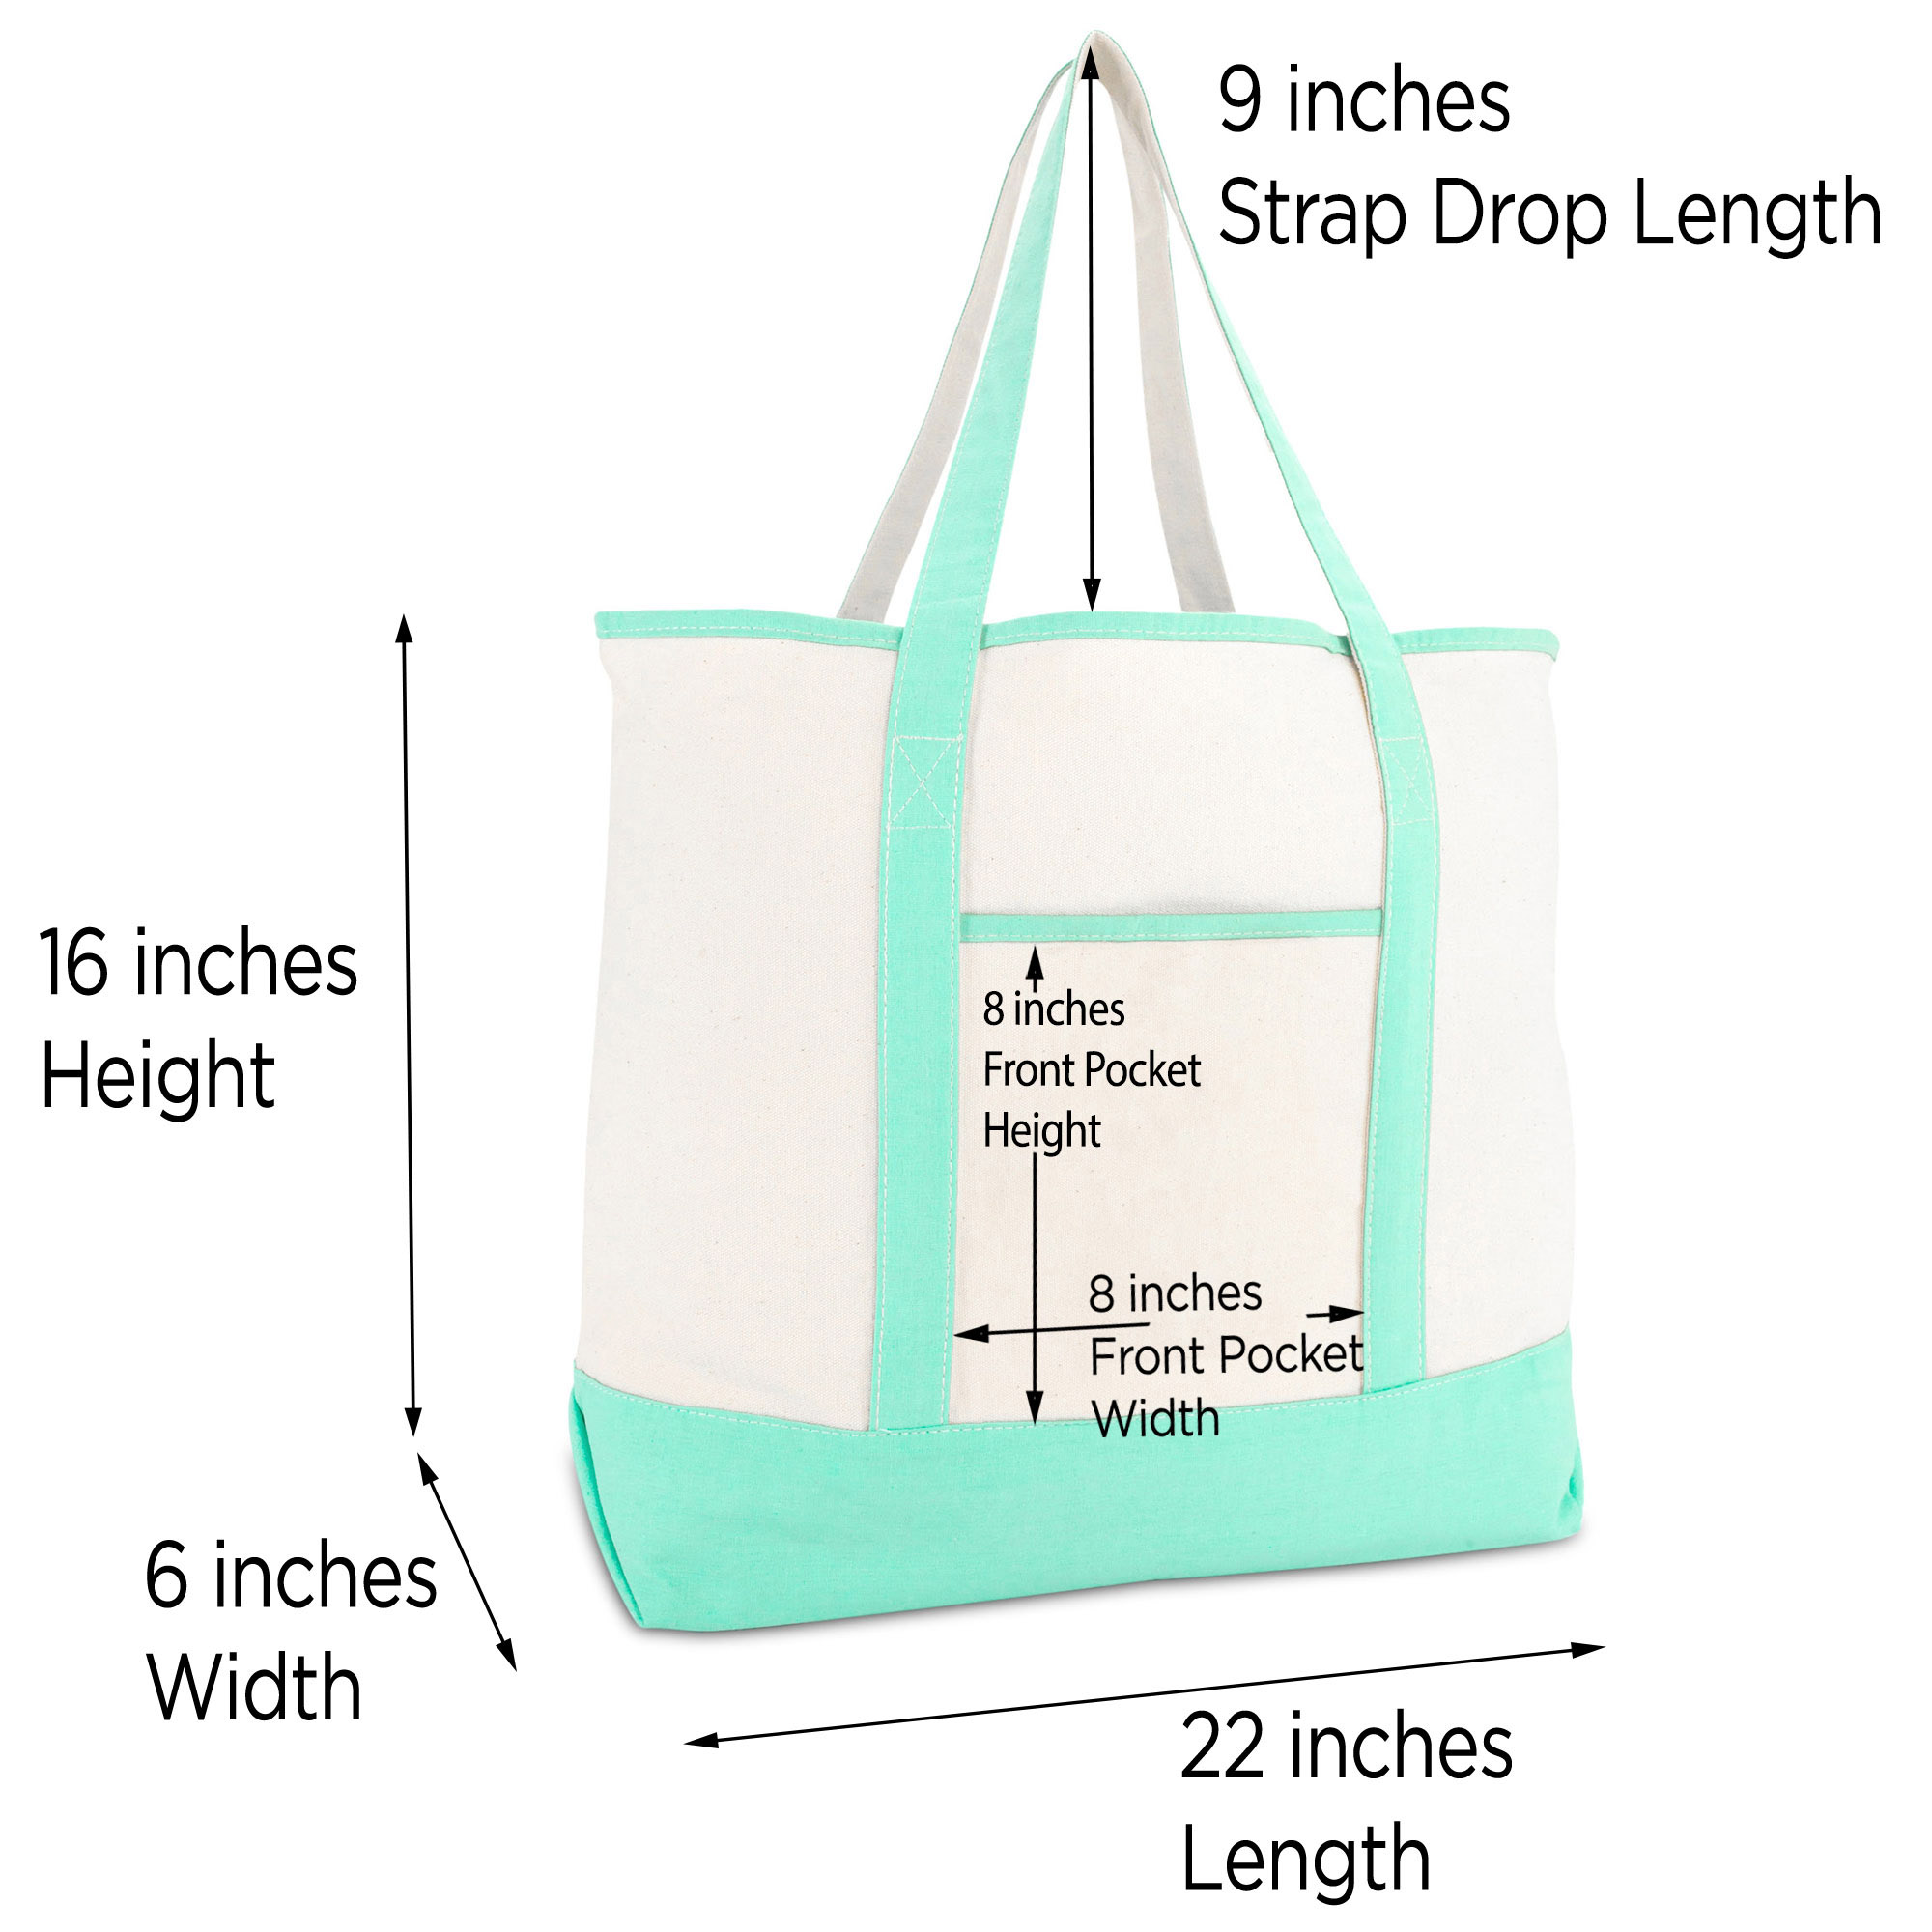 DALIX 22" Open Top Deluxe Tote Bag with Outer Pocket in Mint Green - image 3 of 5